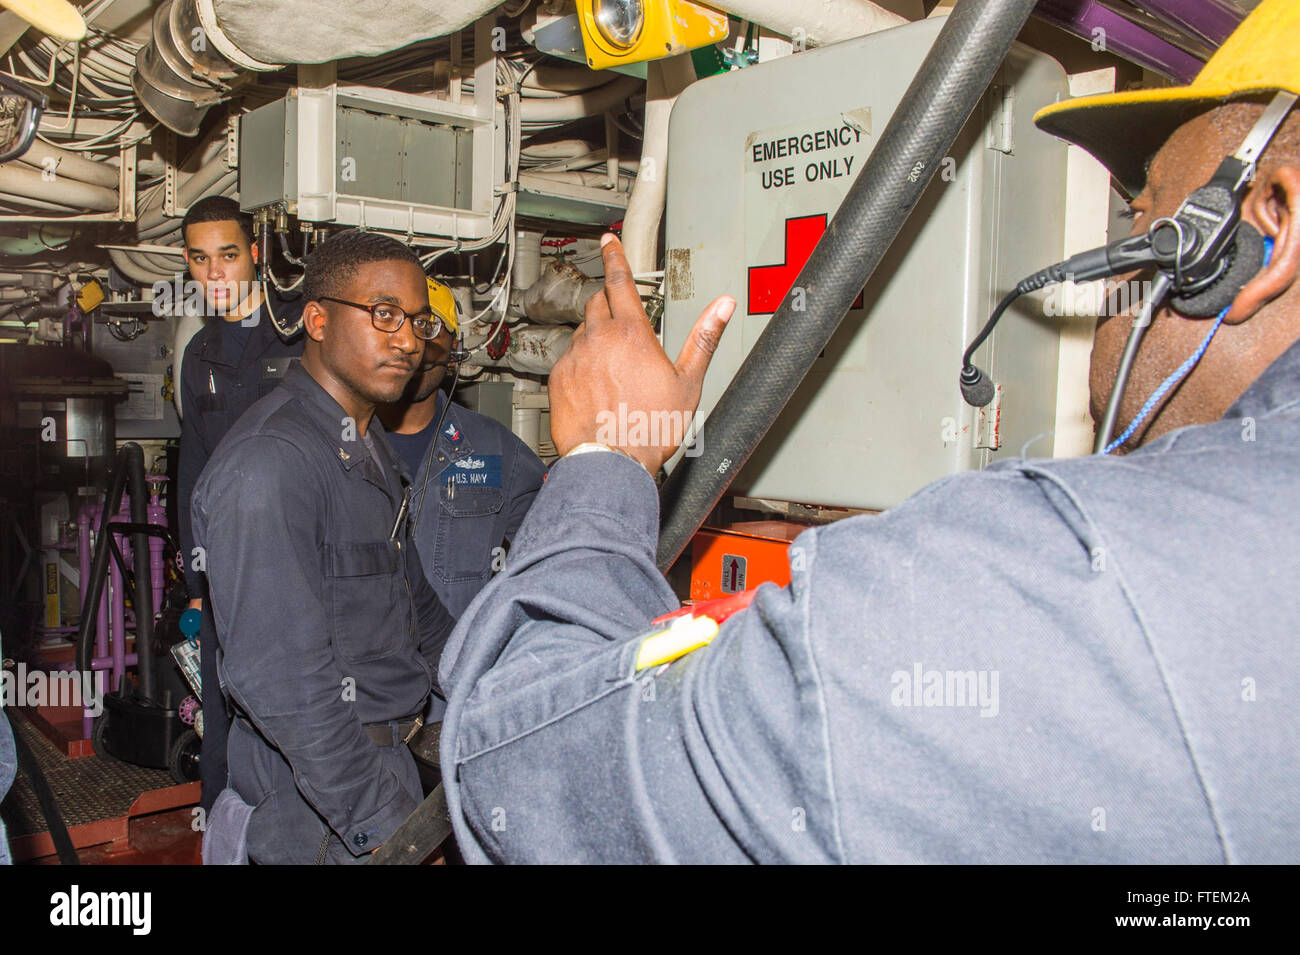 ATLANTIC OCEAN (Feb. 19, 2015) Chief Gas Turbine System Technician Damian Bethel from Miami, right, instructs Sailors, including Gas Turbine Systems Technician 3rd Class Jaylun Nowden, center, on proper firefighting procedures for a Class B fire Feb. 19, 2015. Laboon, an Arleigh Burke-class guided-missile destroyer home ported in Norfolk, is underway conducting naval operations in the U.S. 6th Fleet area of operations in support of U.S. national security interests in Europe. Stock Photo